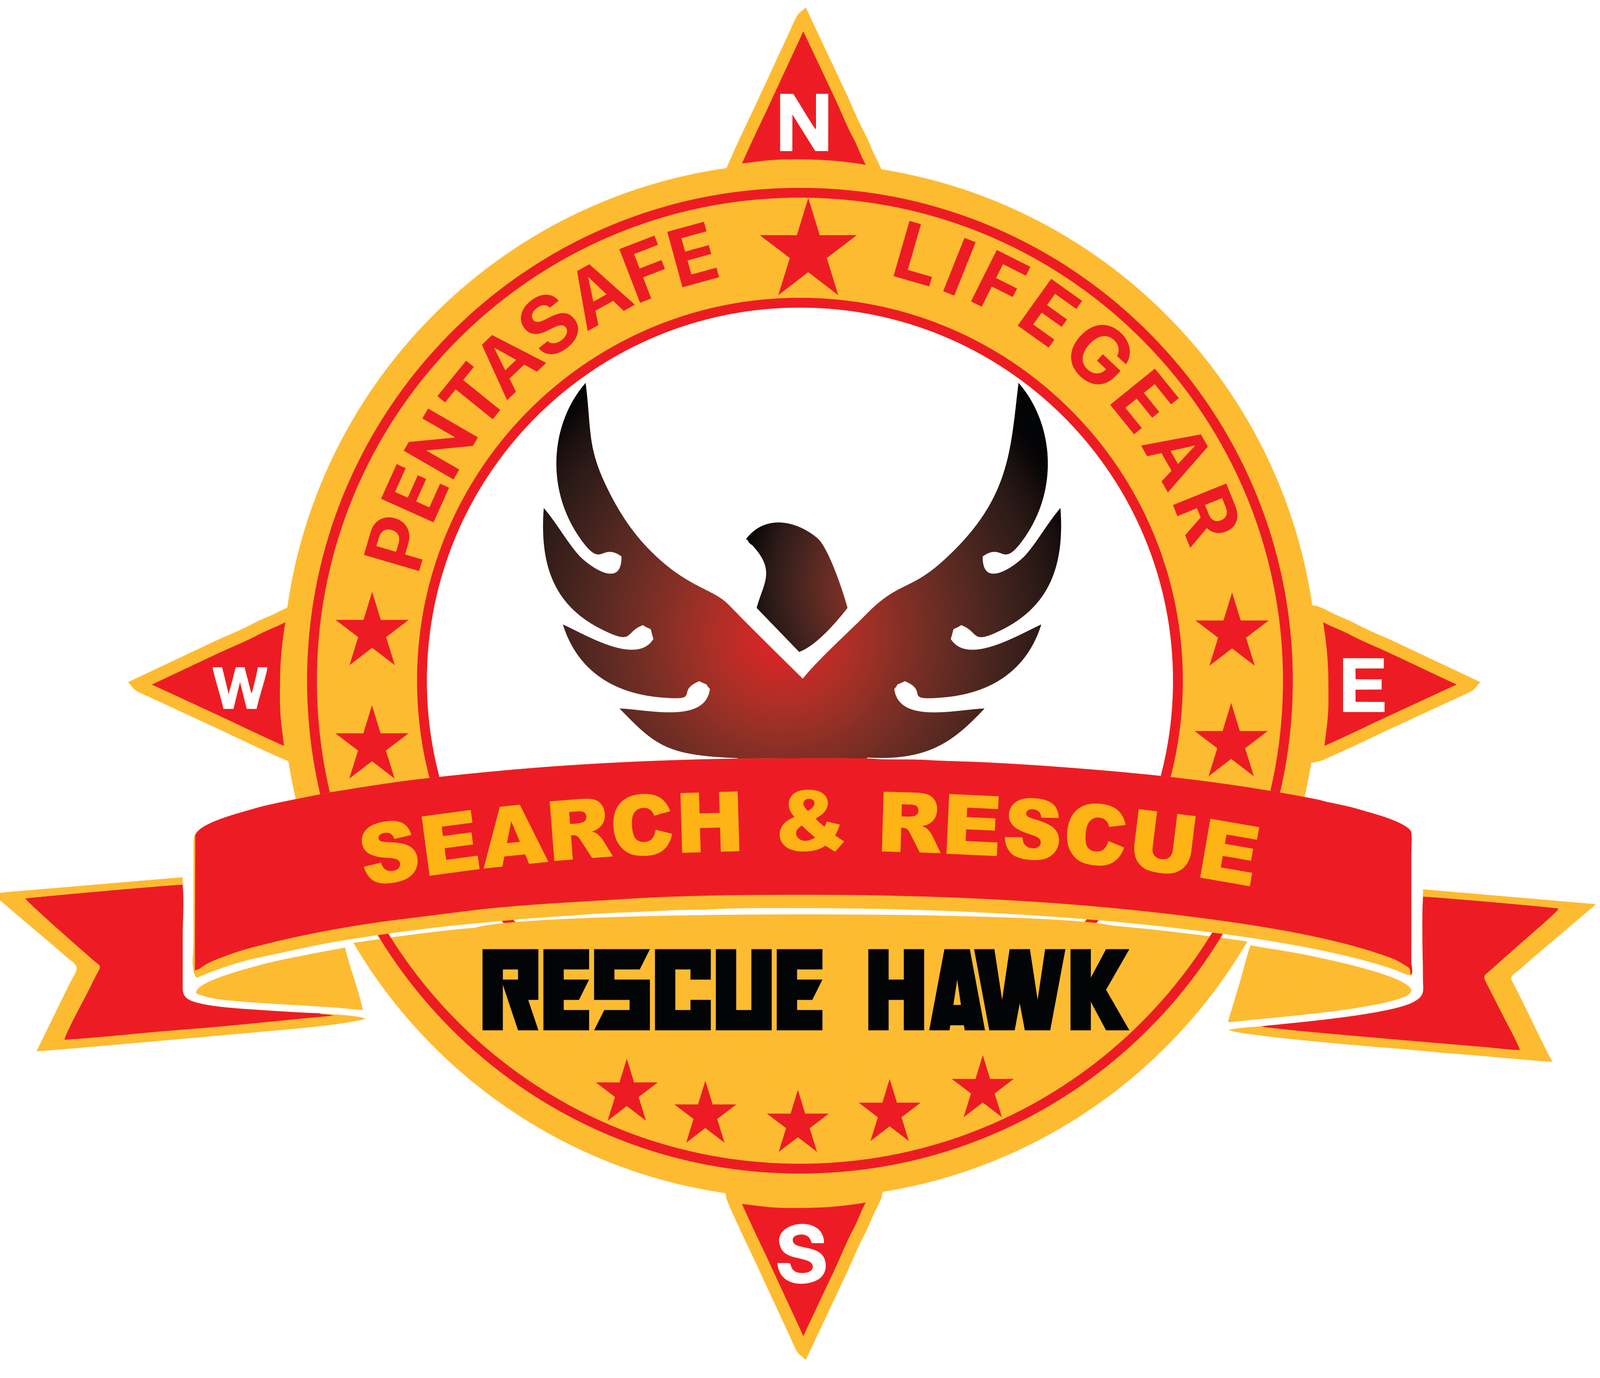 Rescue Kits - Water Rescue Kit - Shore Based - Lifegear Safetech, Model Name/Number:  200105 at Rs 10 in Lonavla